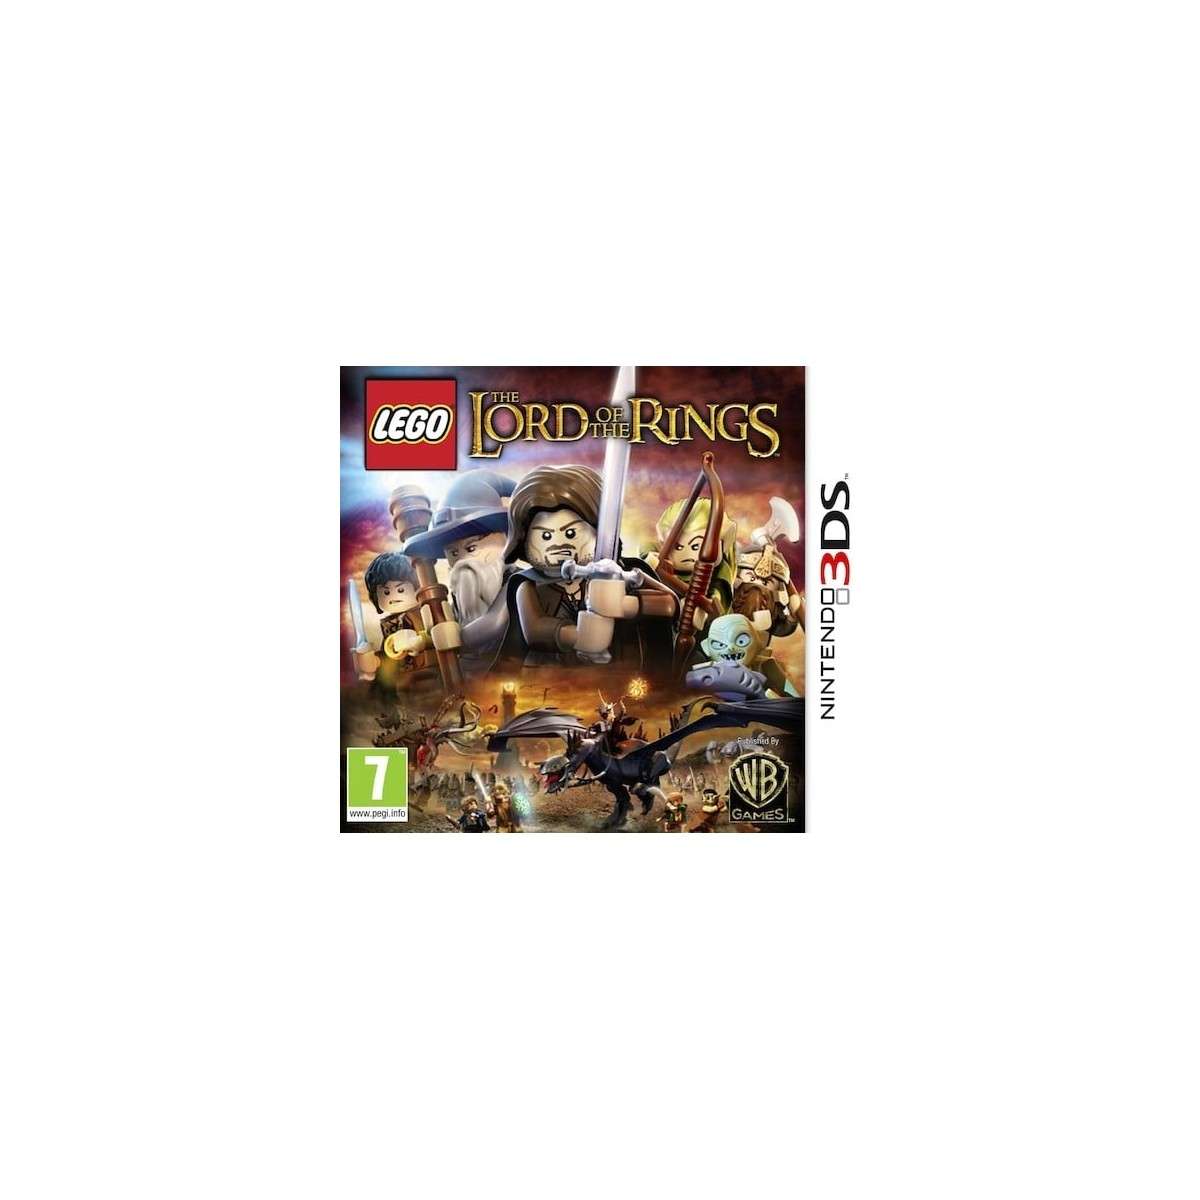 LEGO Lord of the Rings: Epic Action & Adventure on Nintendo 3DS!